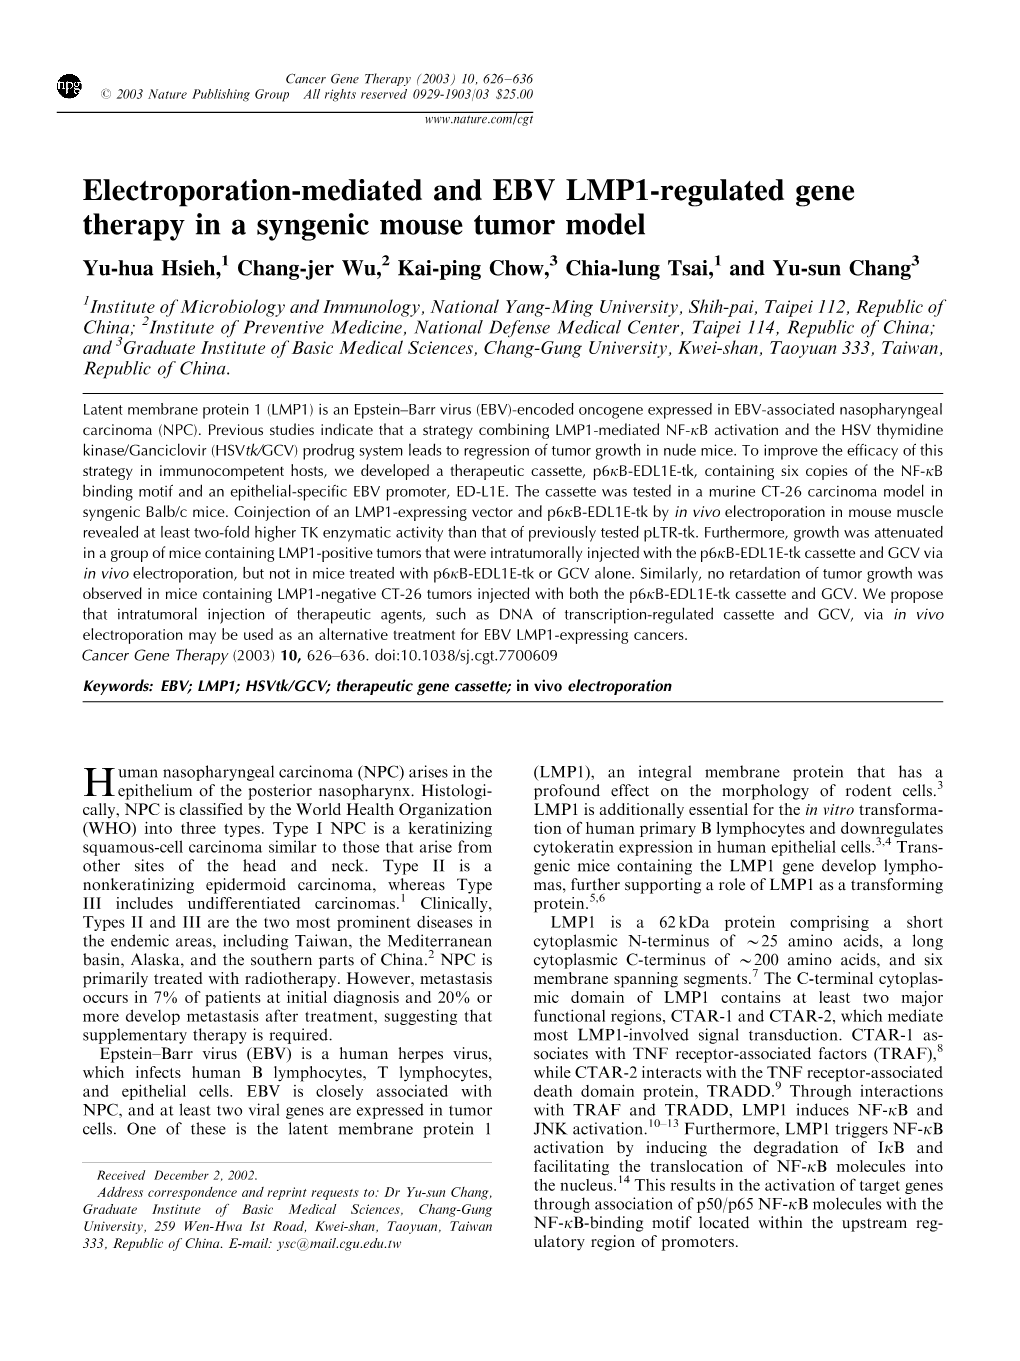 Electroporation-Mediated and EBV LMP1-Regulated Gene Therapy in A